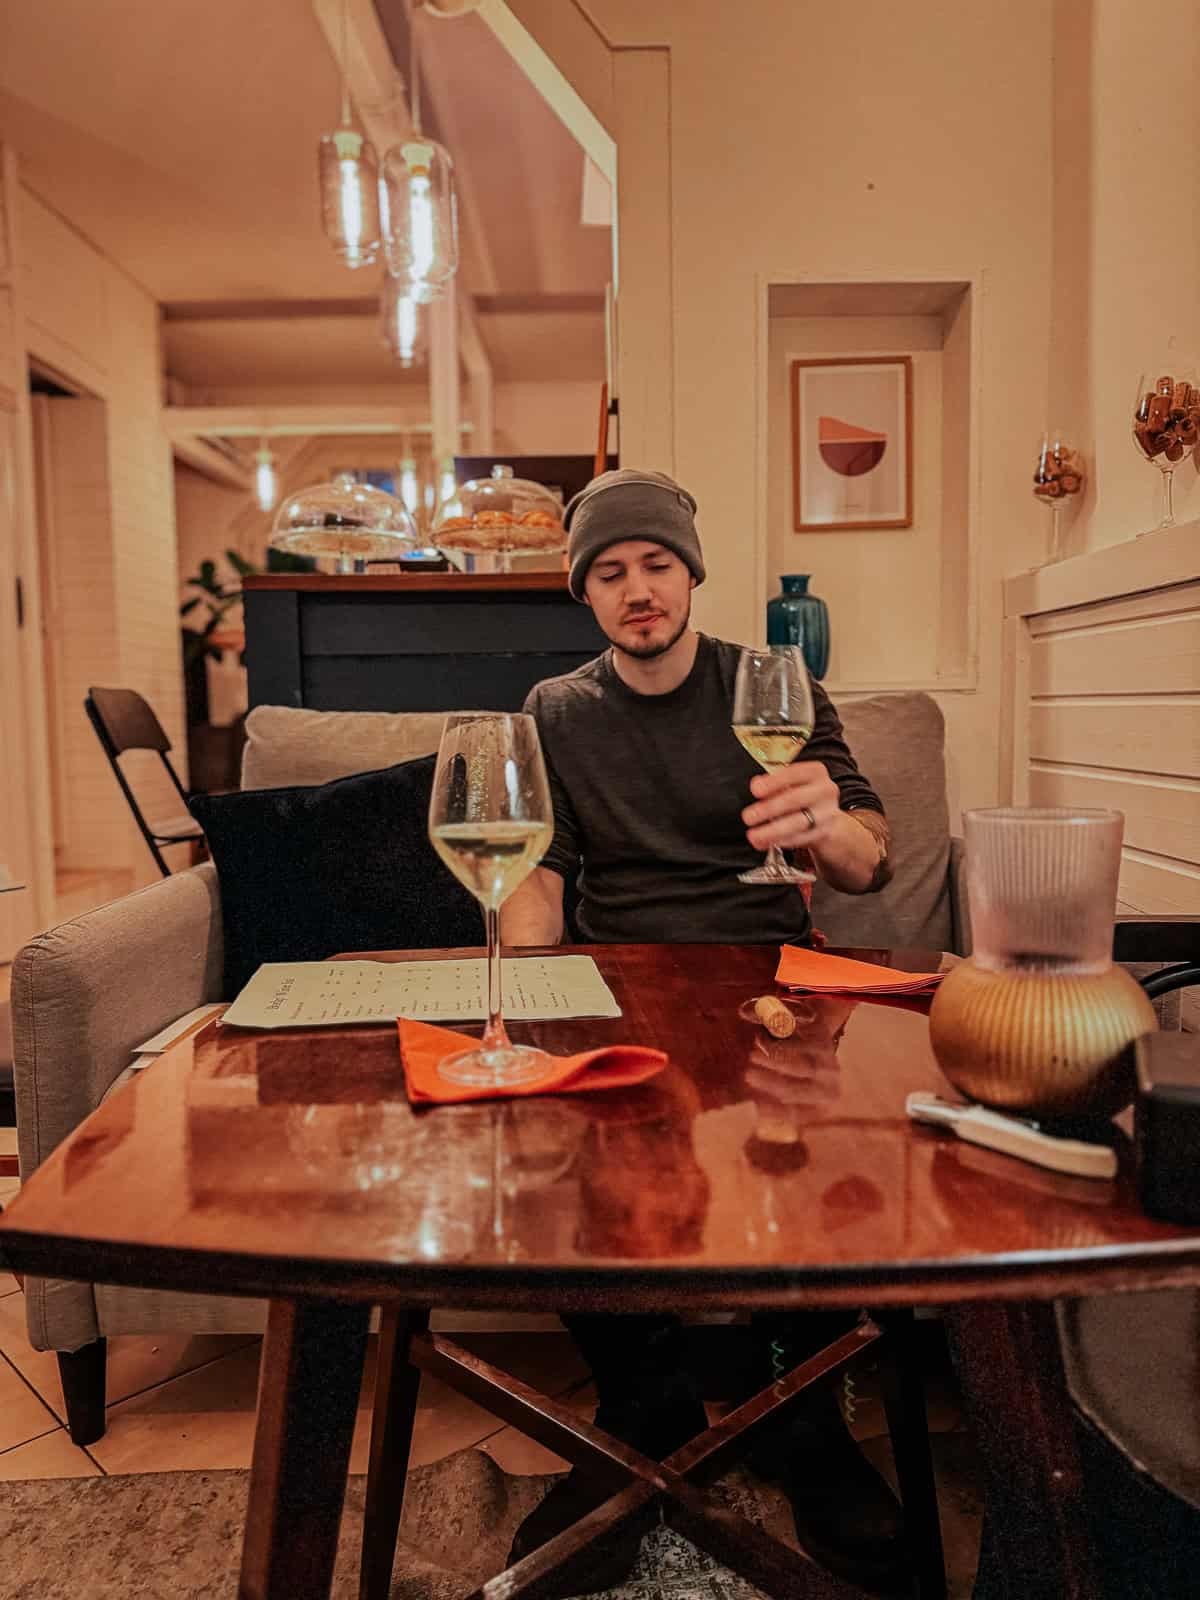 A man in a gray beanie is sitting at a table in a cozy restaurant, holding a glass of white wine. The table has a menu and another glass of wine.